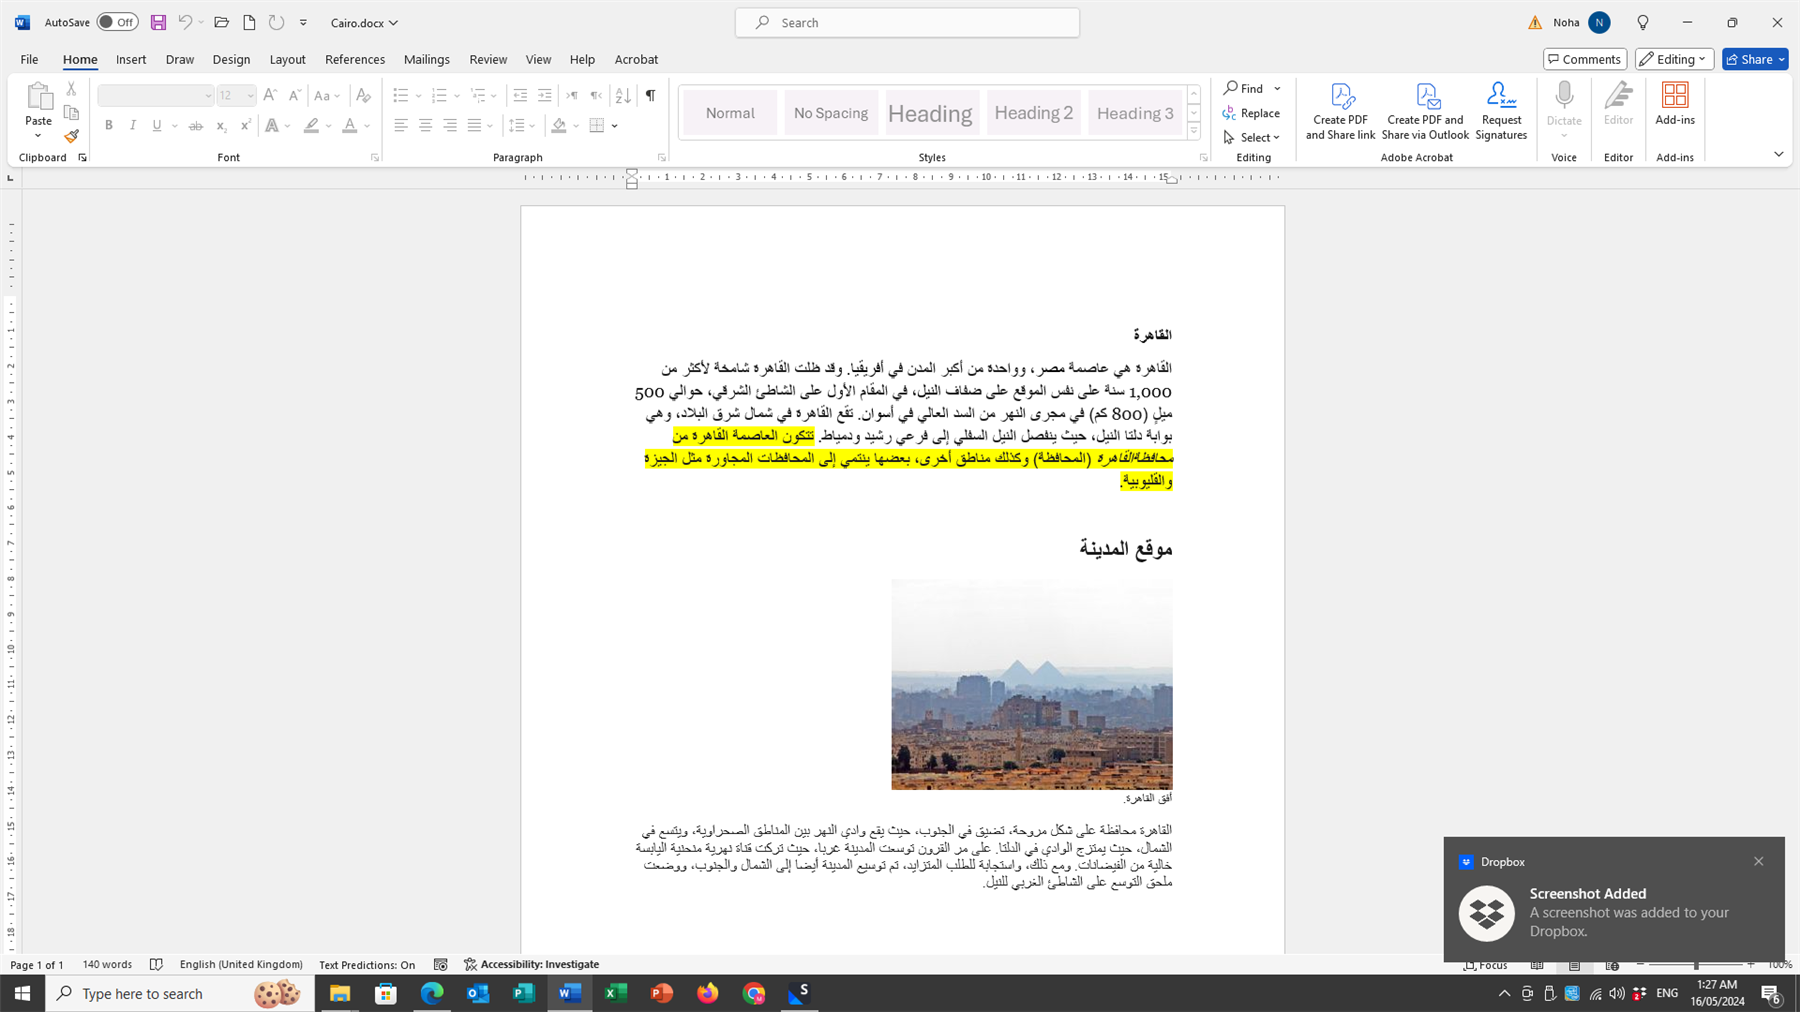 Screenshot of a Microsoft Word document with Arabic text and an image of a cityscape, indicating the output from Trados Studio's external preview feature.